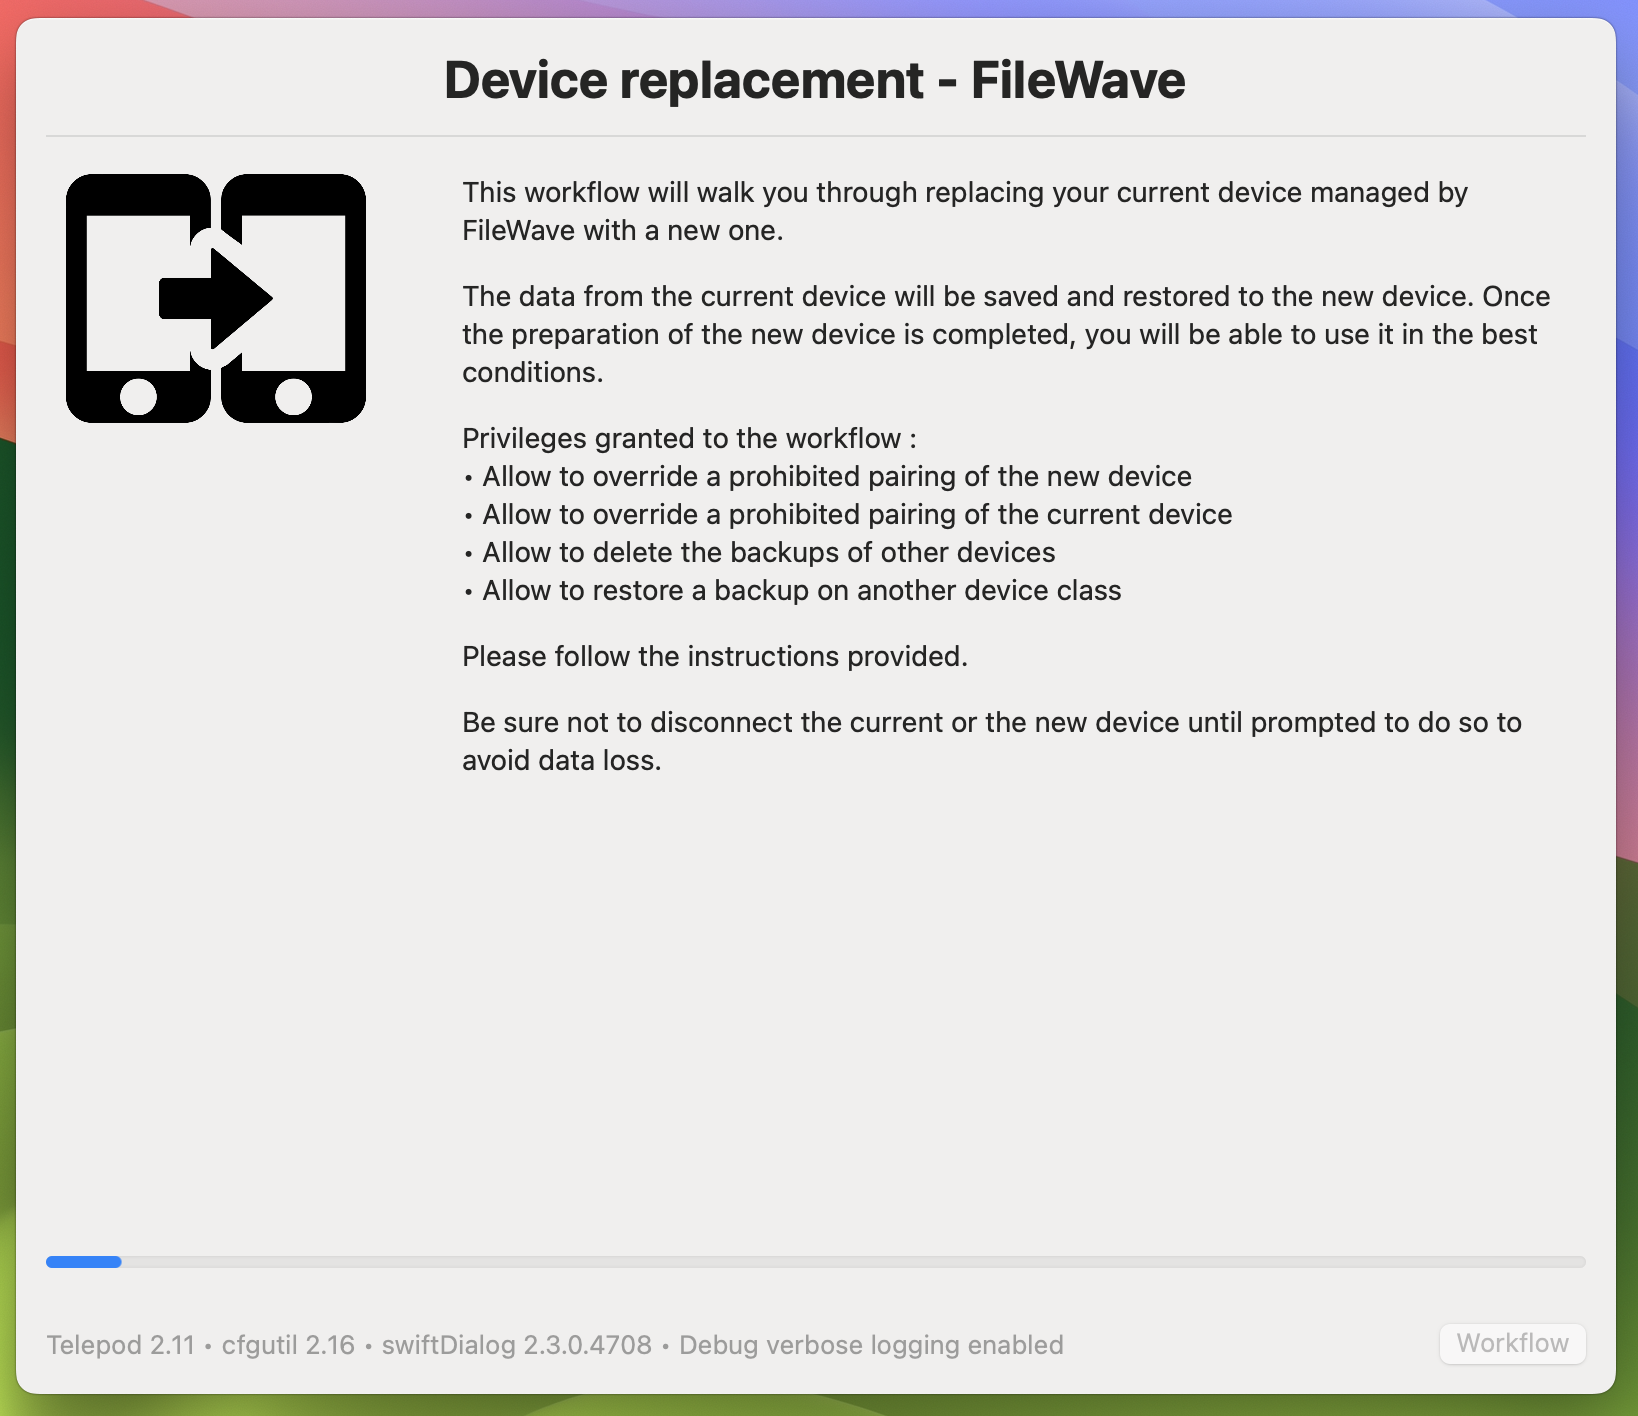 telepod_2_replacement_filewave_003_Workflow introduction.png